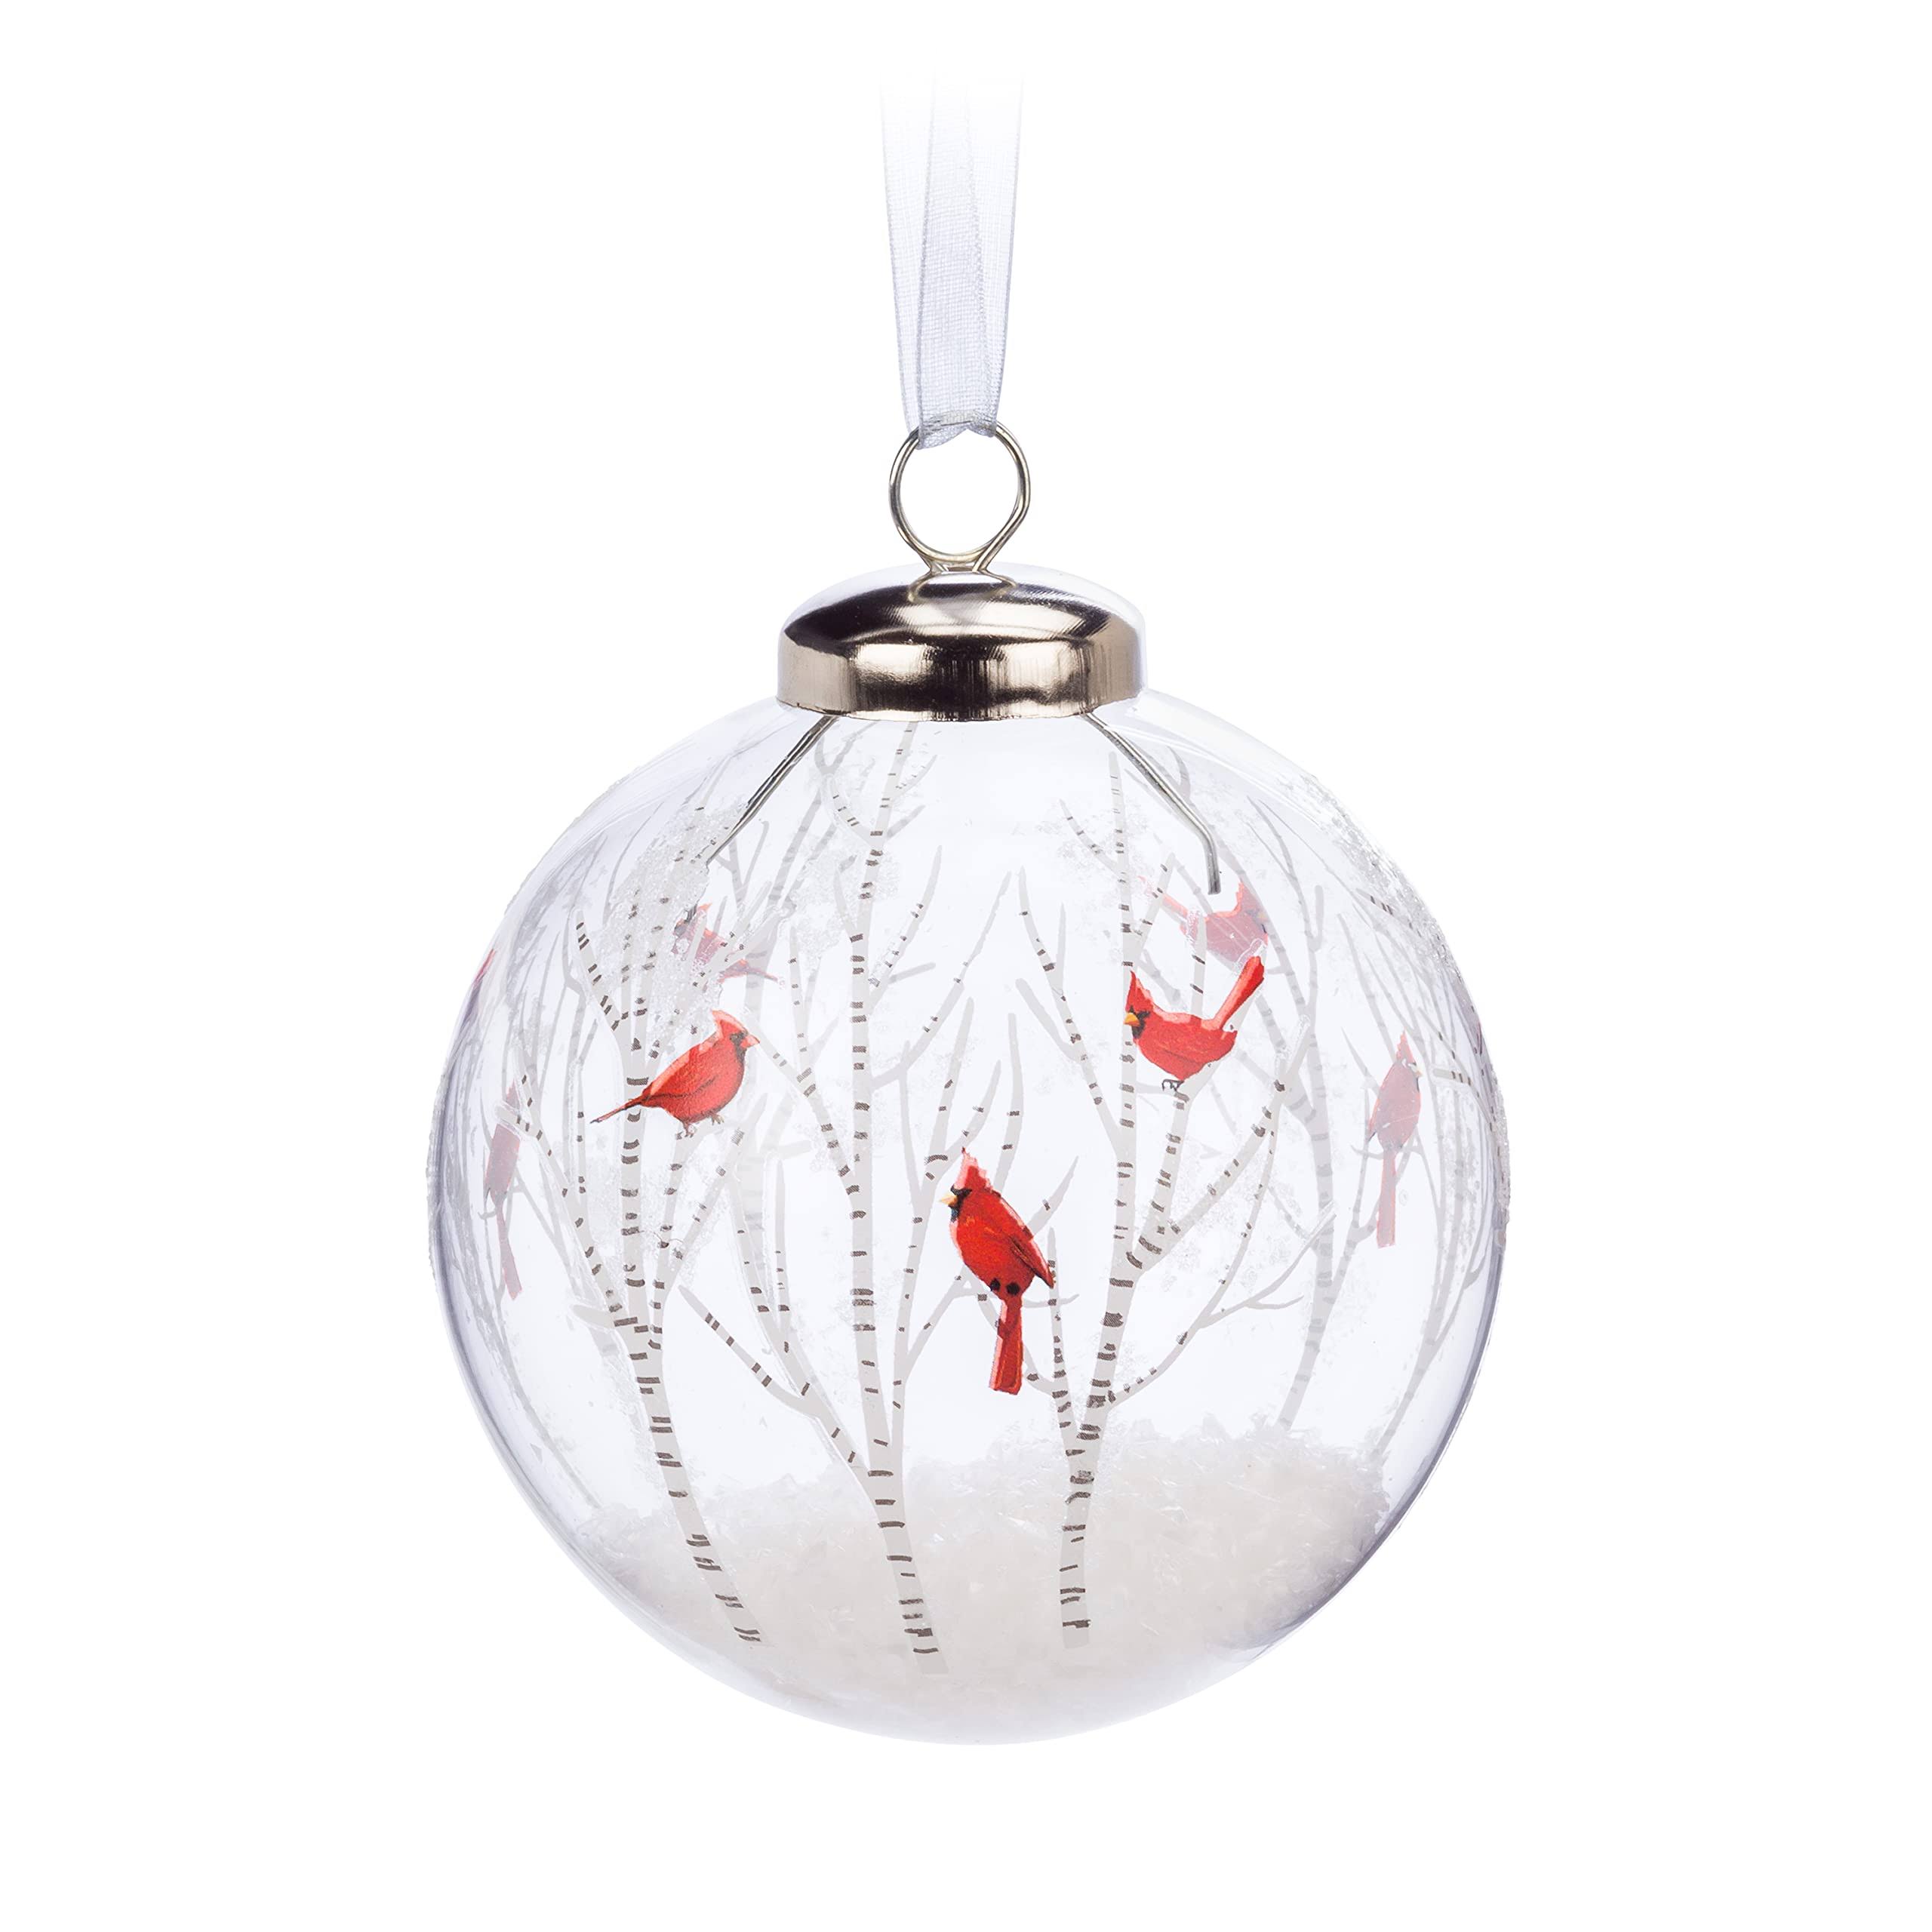 Abbott Collection 27-BALL-3419 Cardinal in Trees Ball Ornament, Red/White